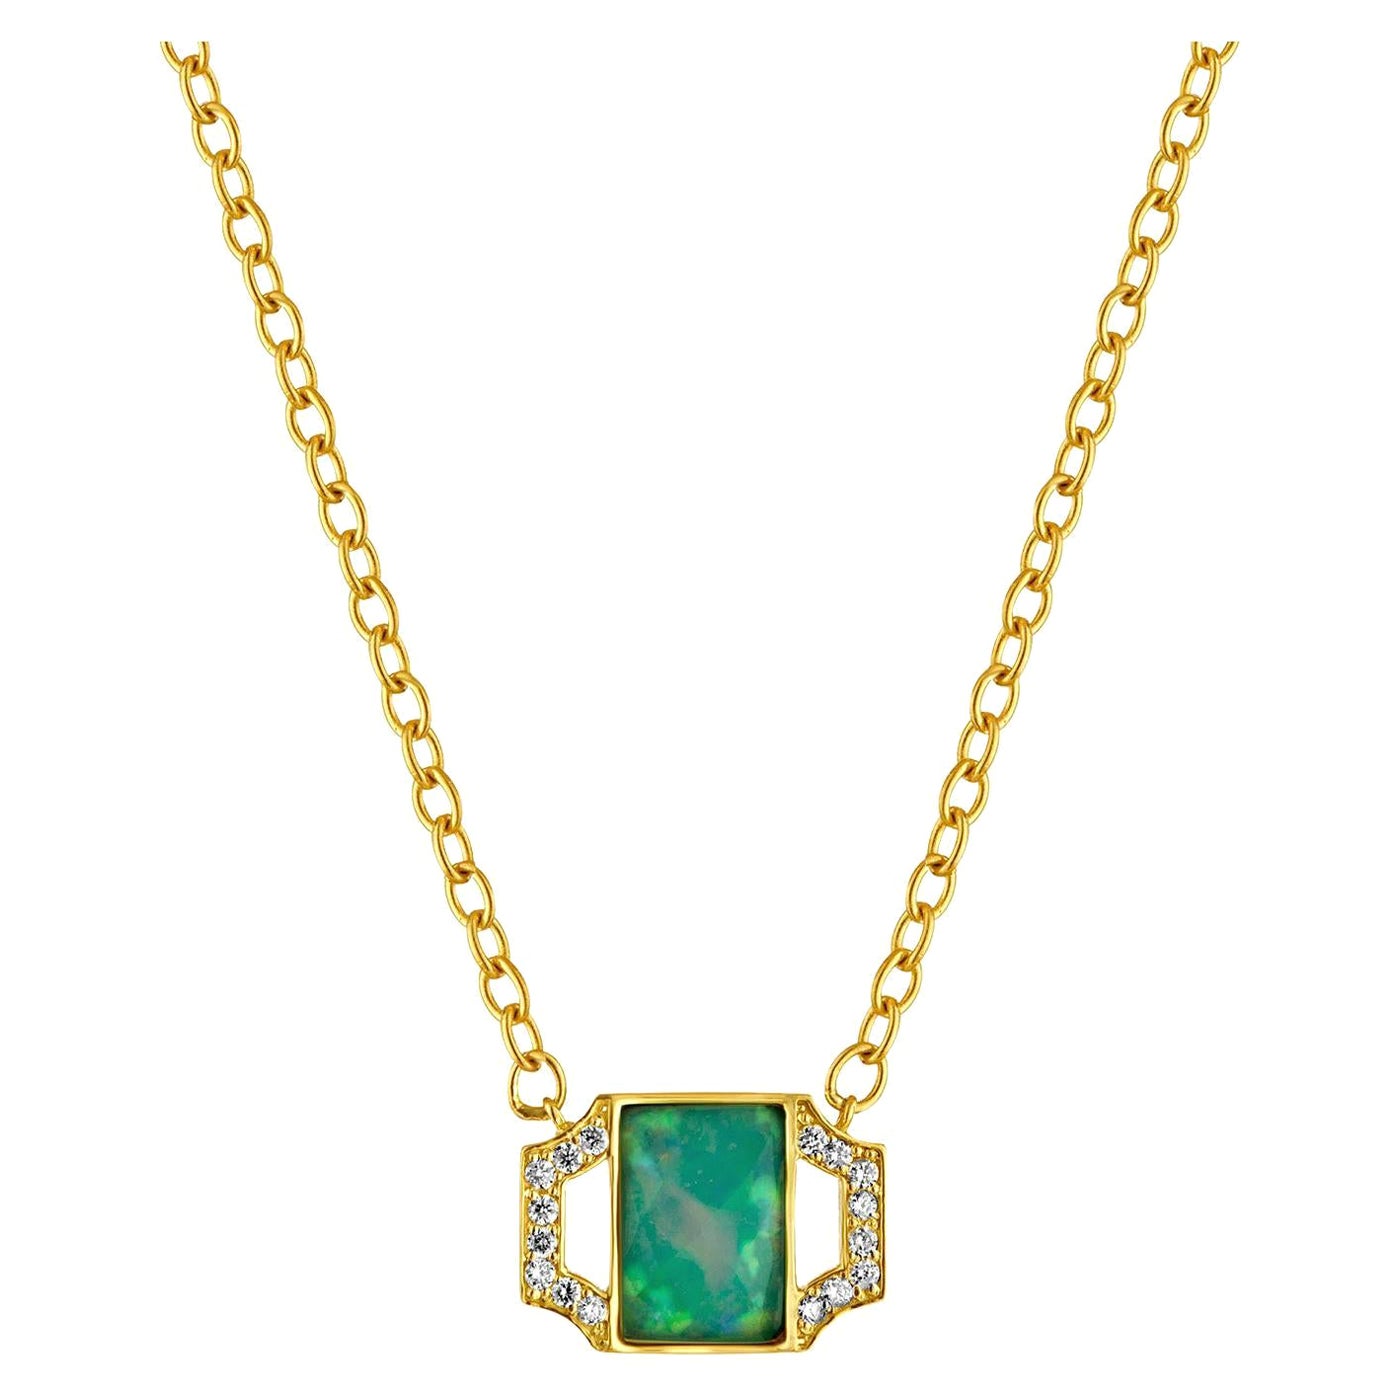 18k Gold Deco Style Pendant with Opal and Diamonds